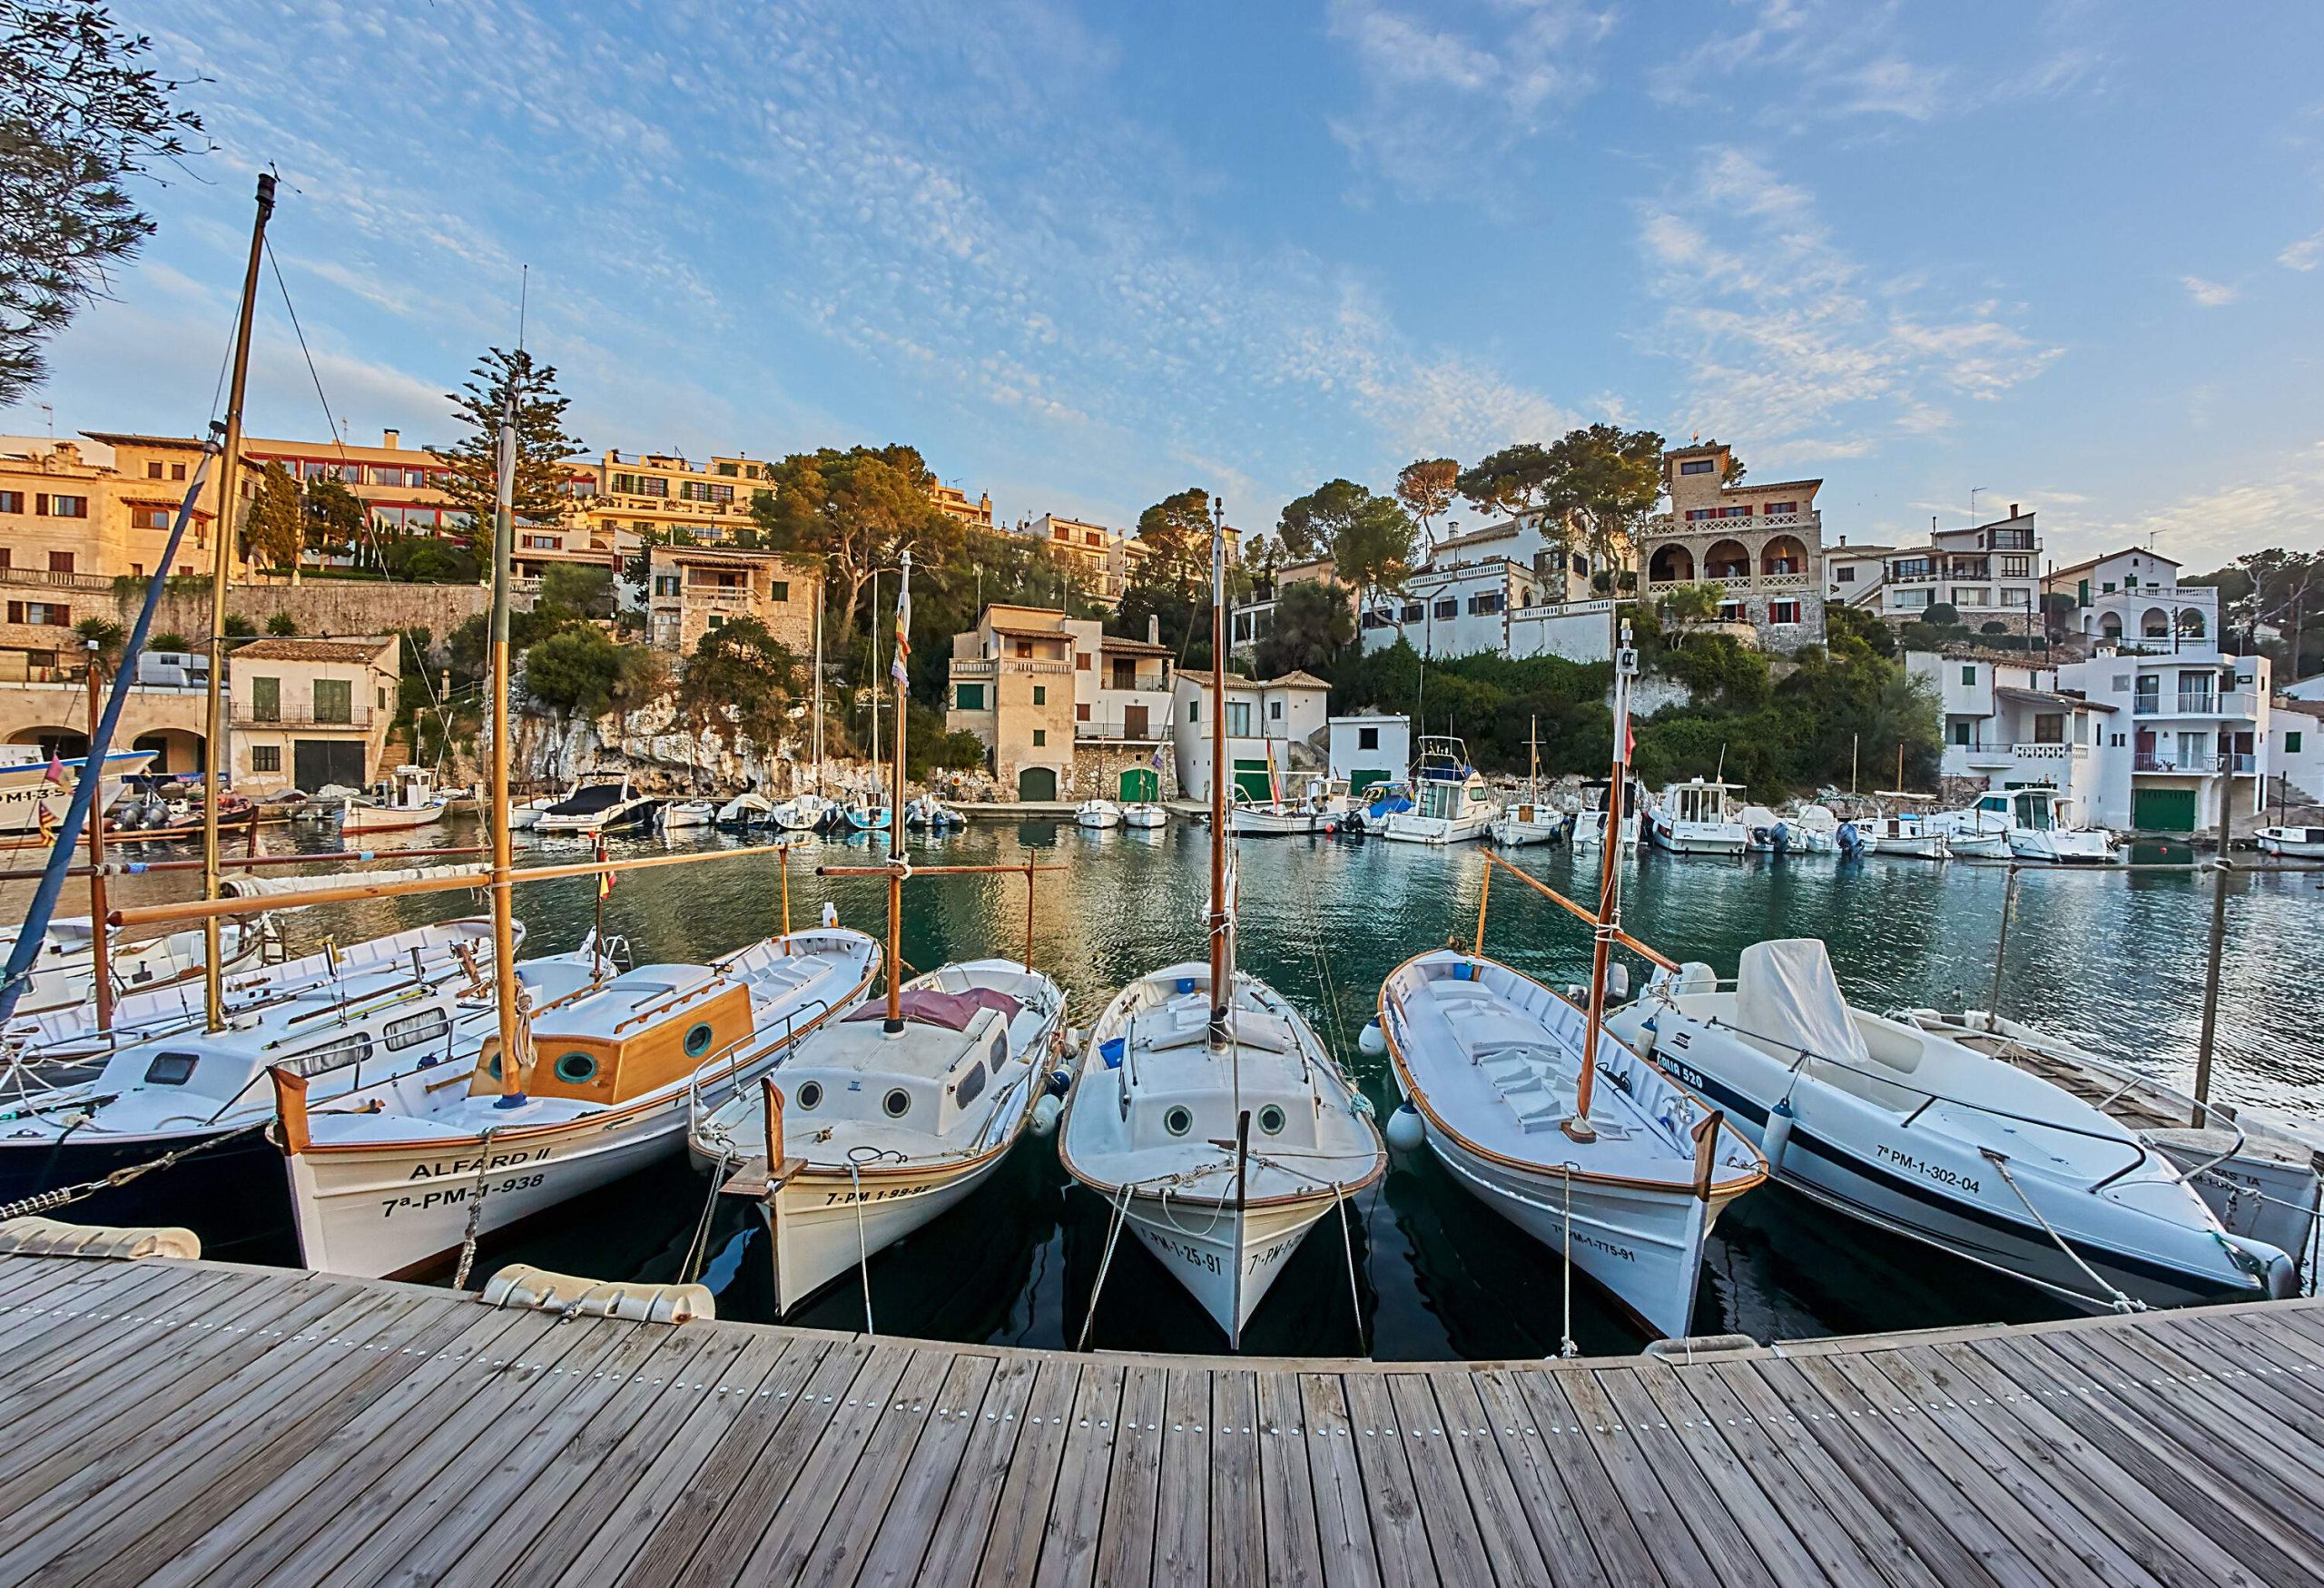 A row of white boats anchored on a wooden pier in a port surrounded by the townscape.